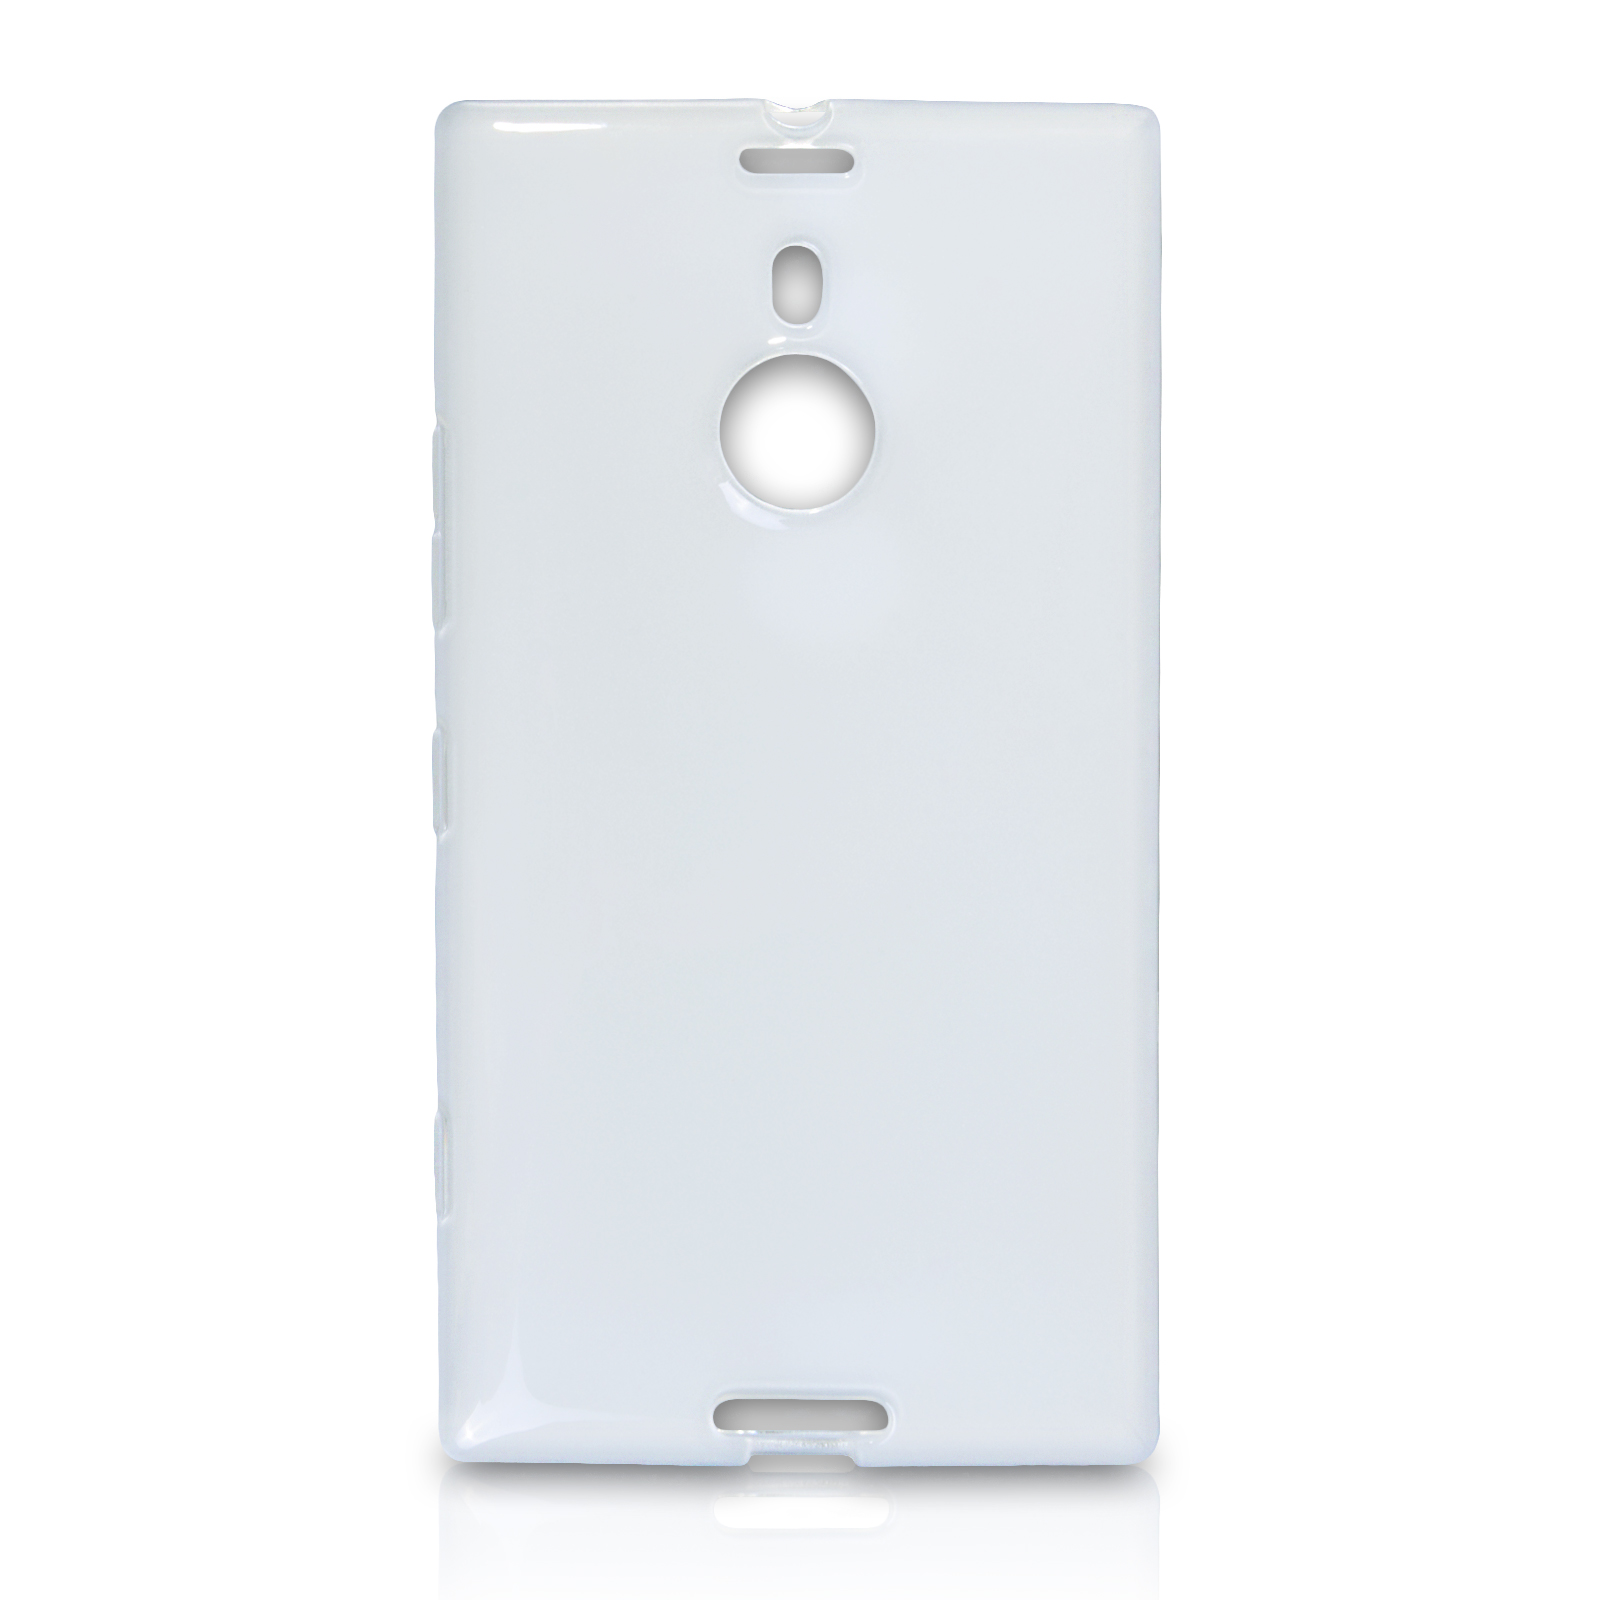 Silicone case for nokia 1520 clear